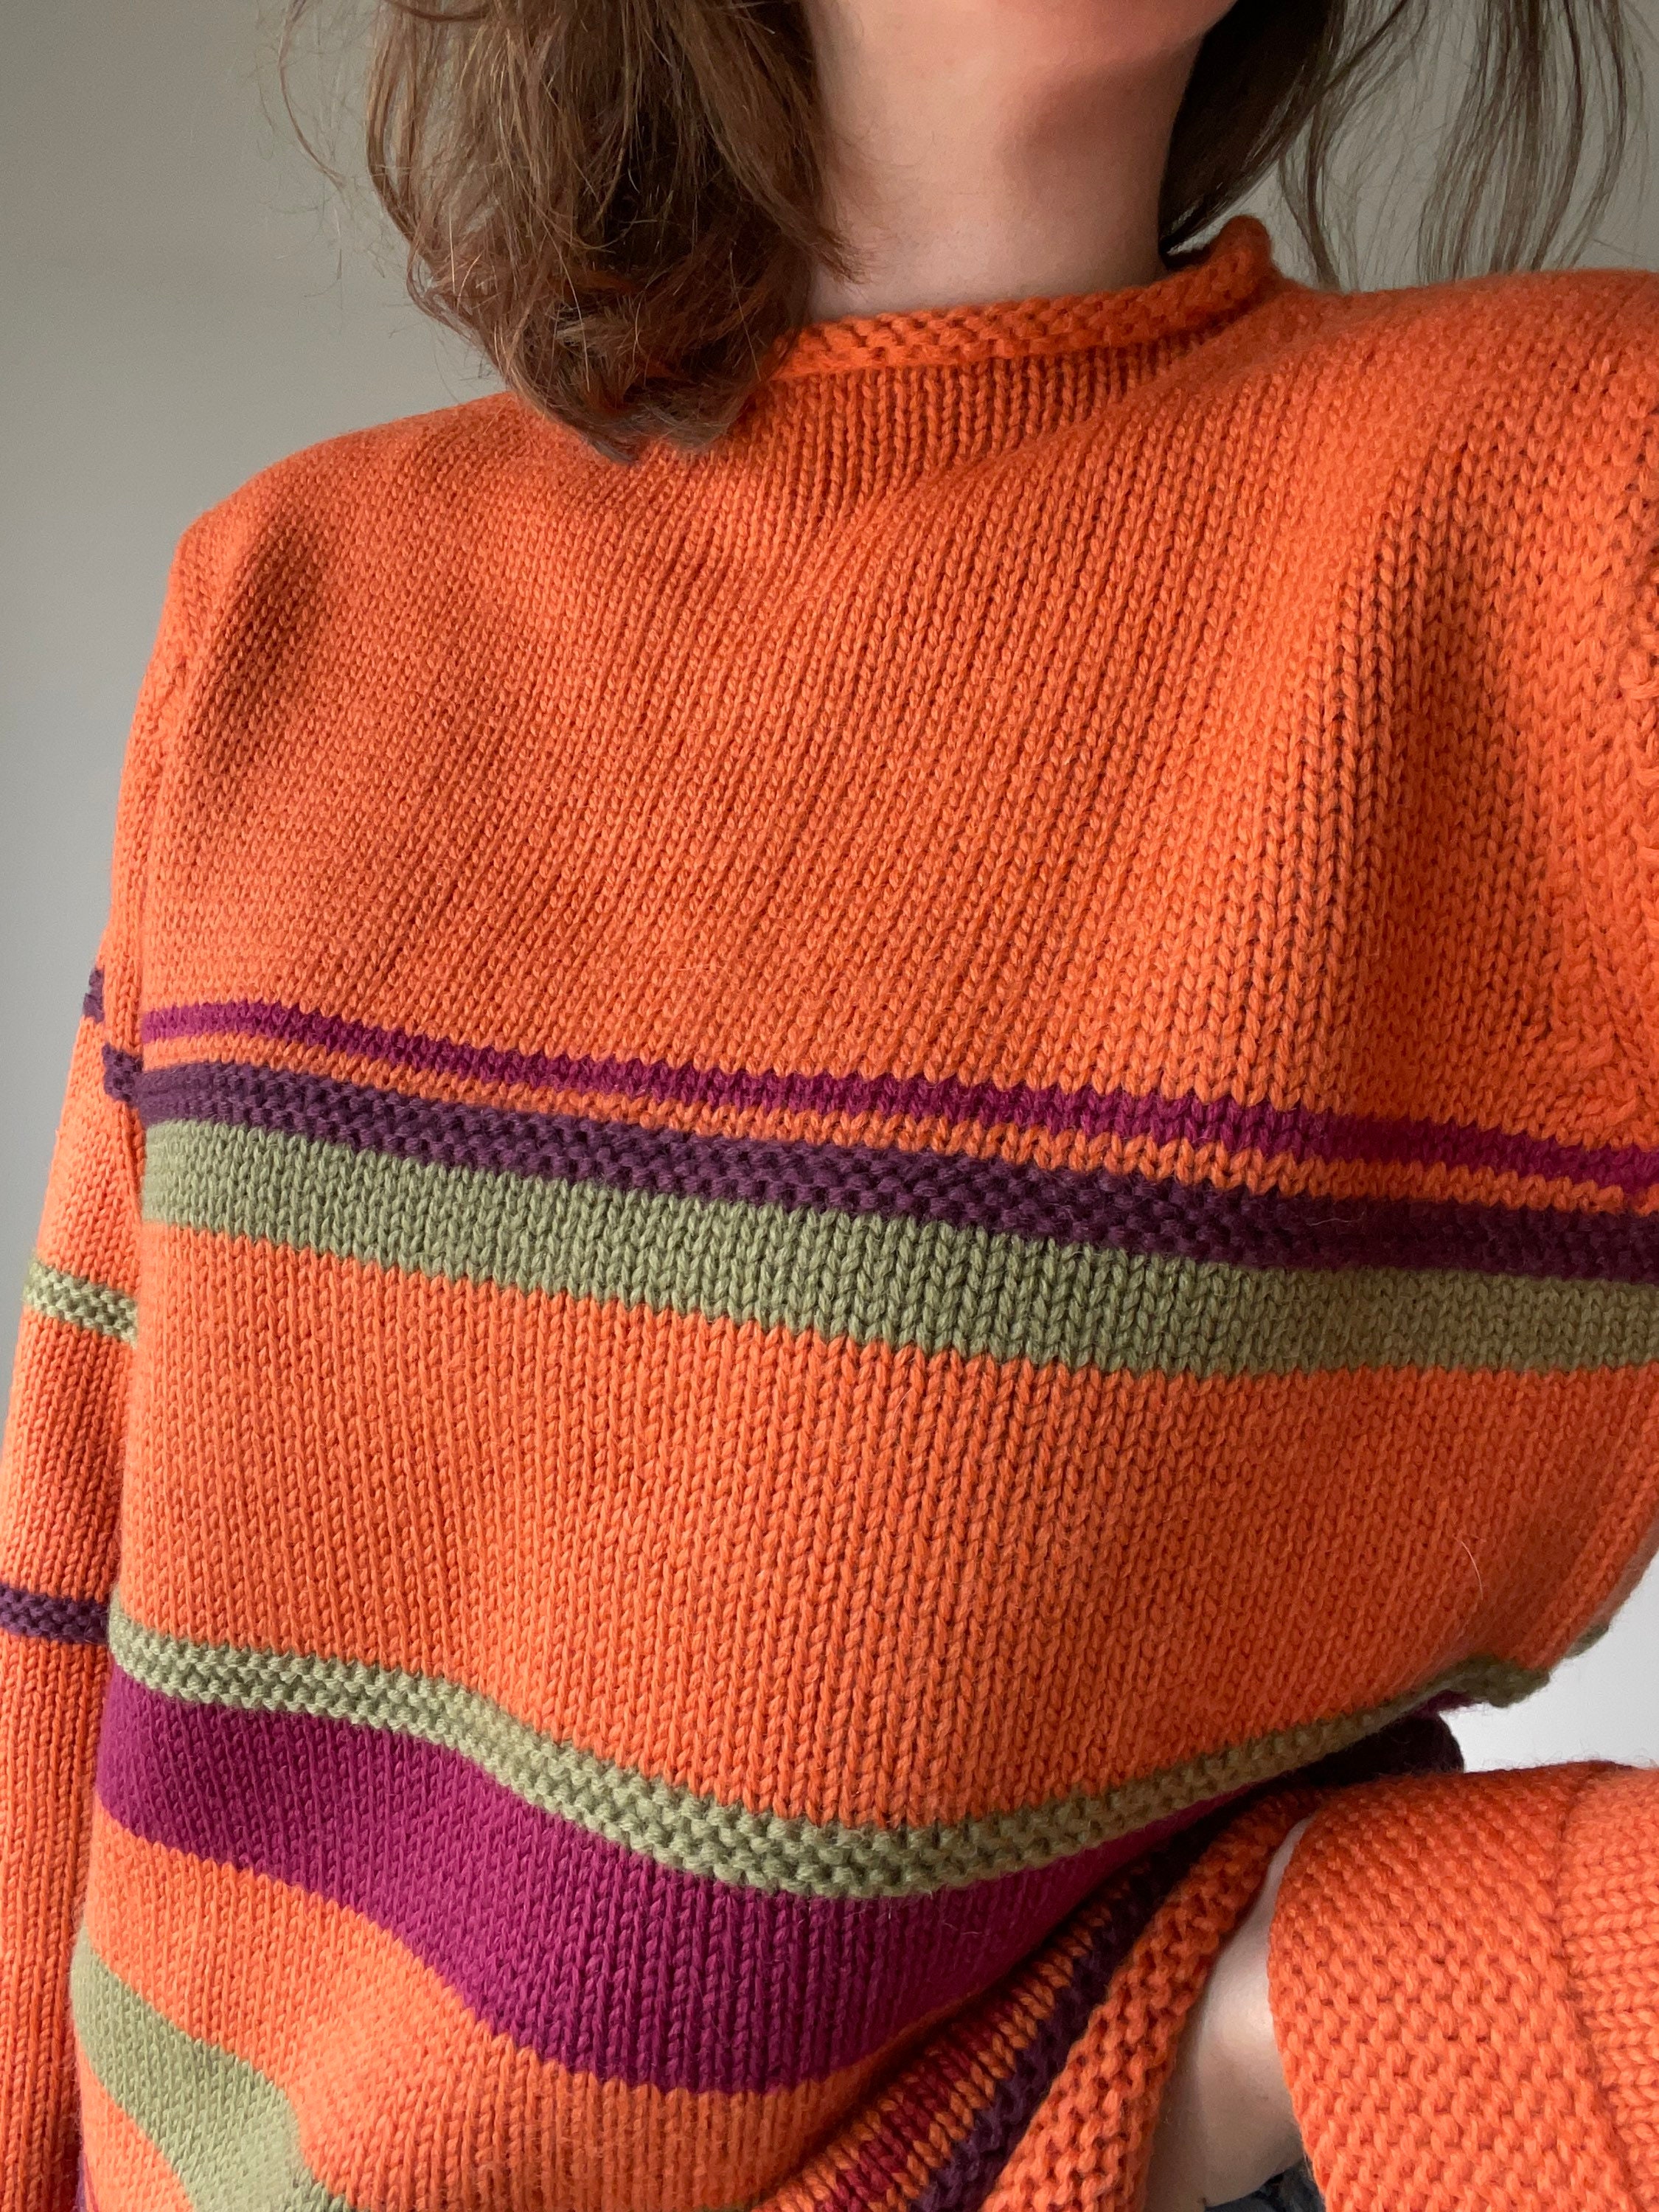 70's striped pullover knit sweater / 100% wool / orange | Etsy